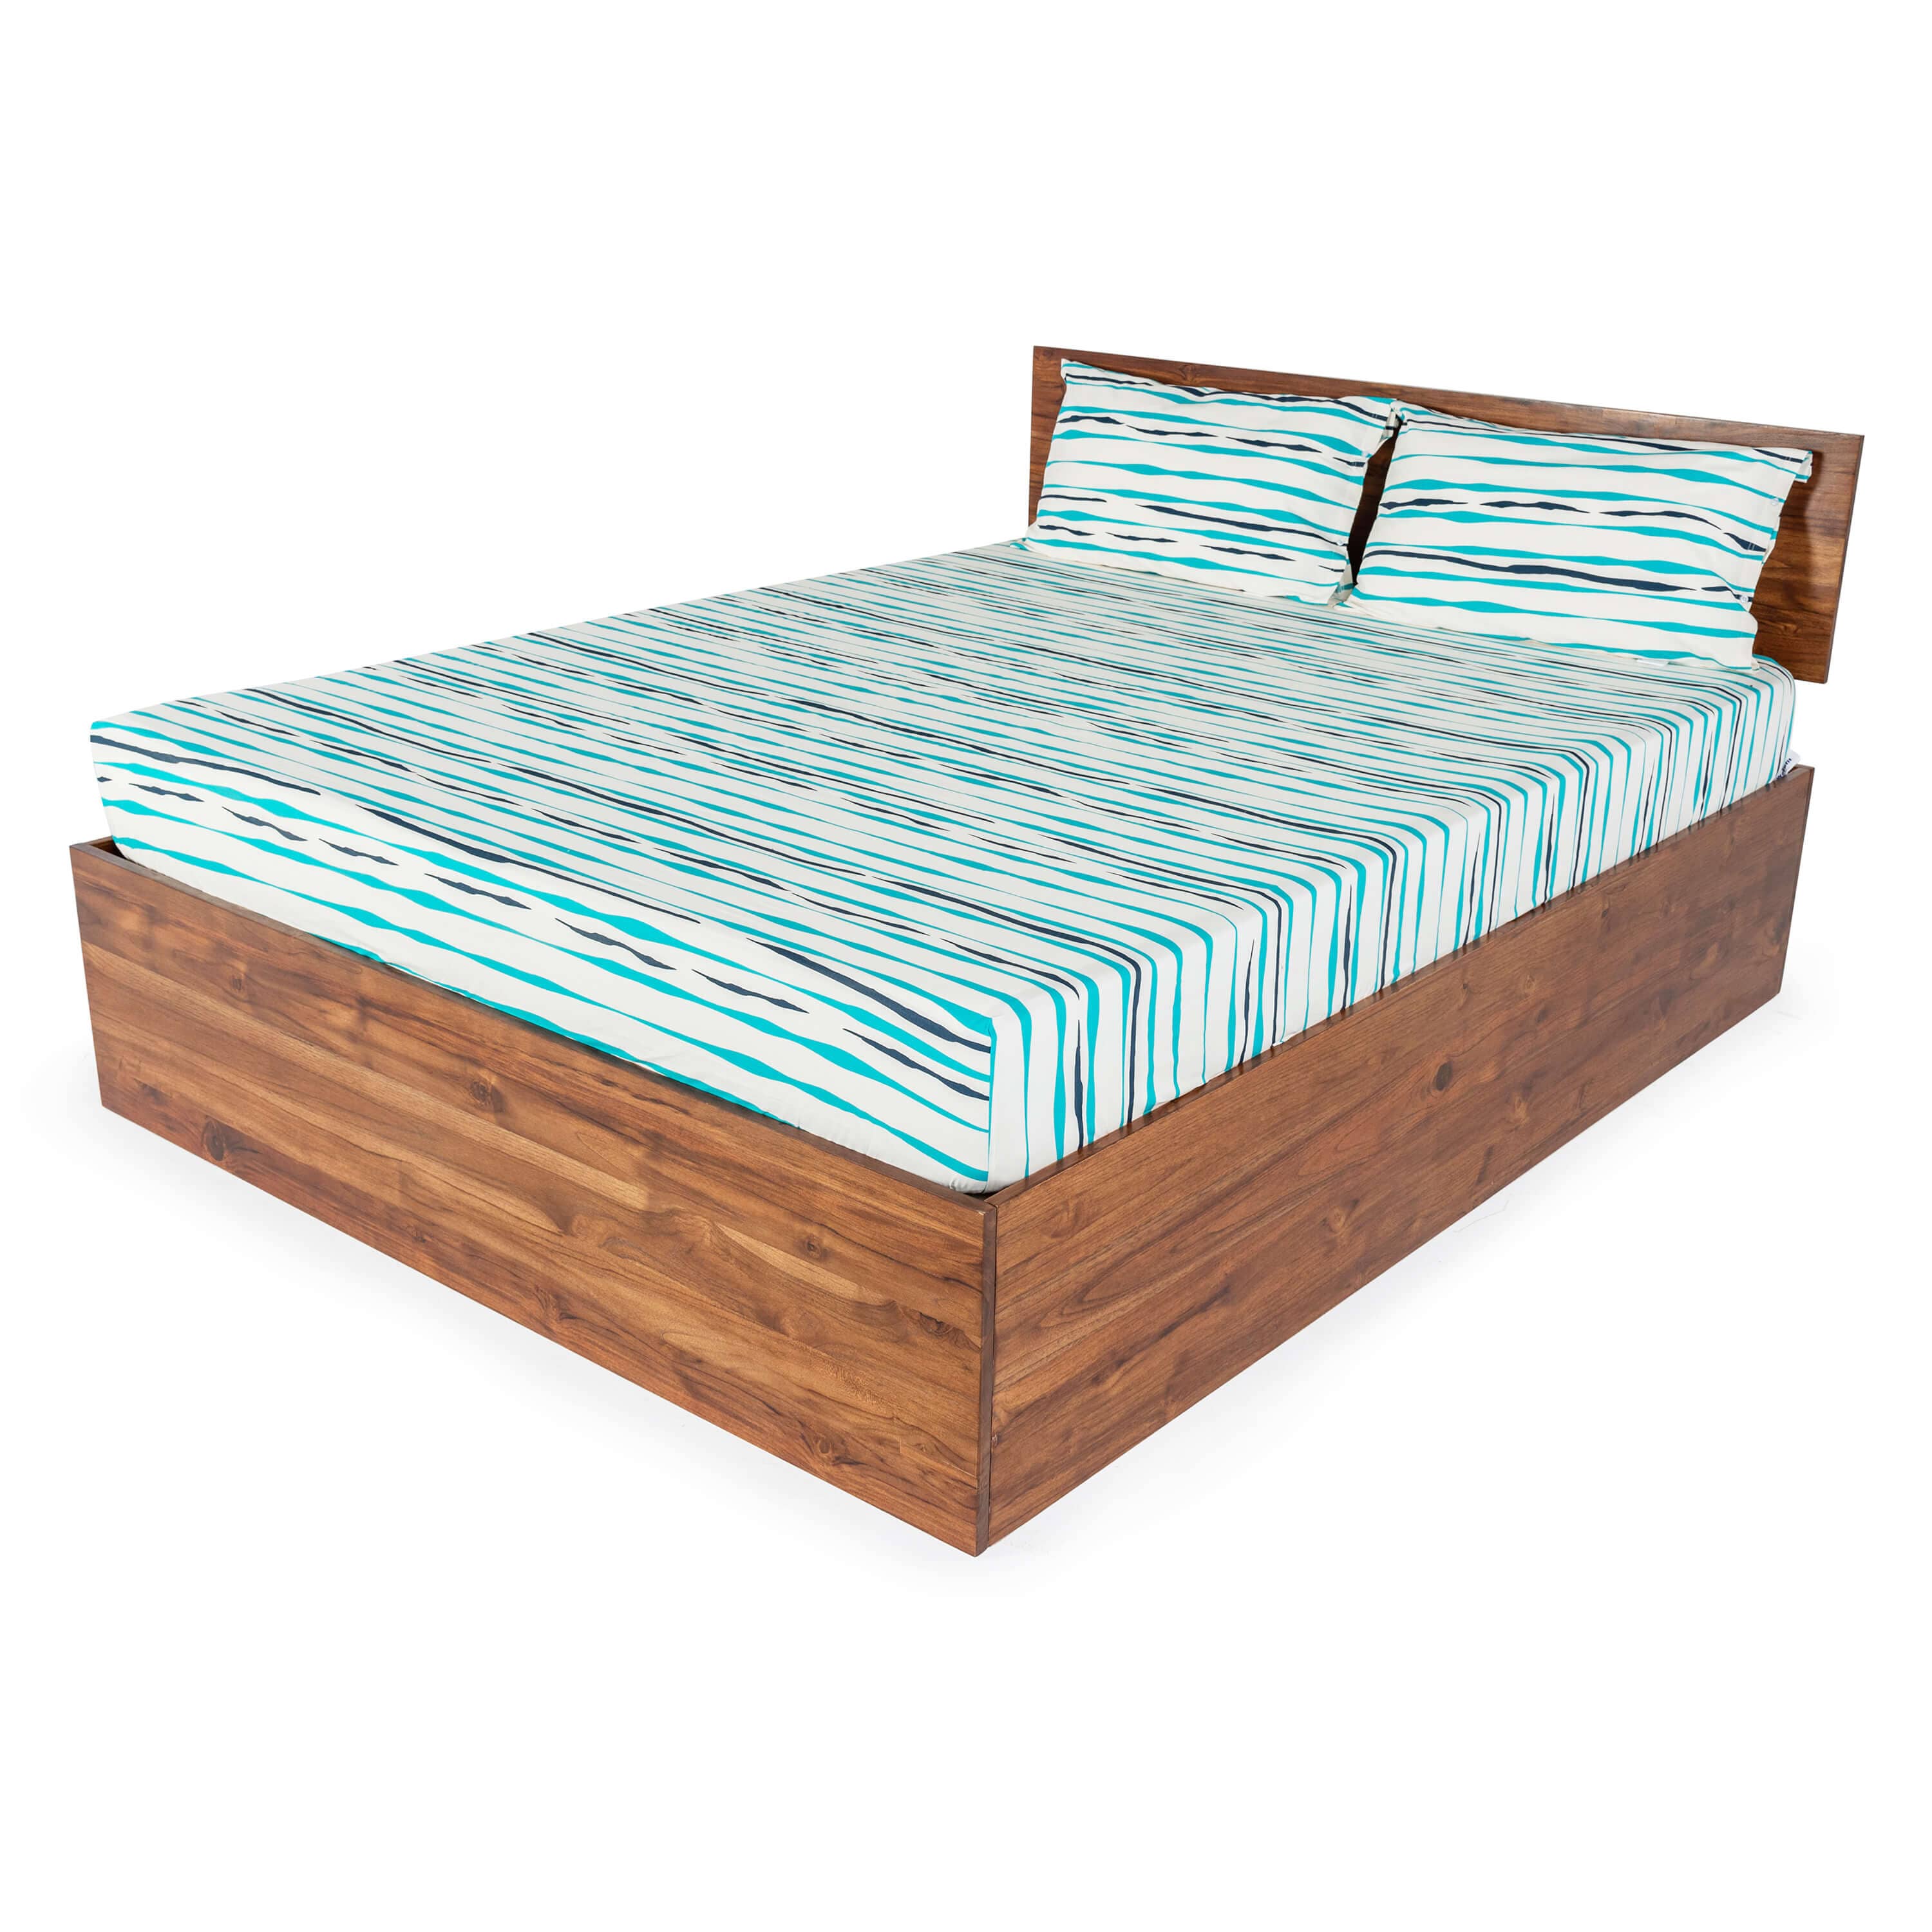 fitted bedsheets|wakefit